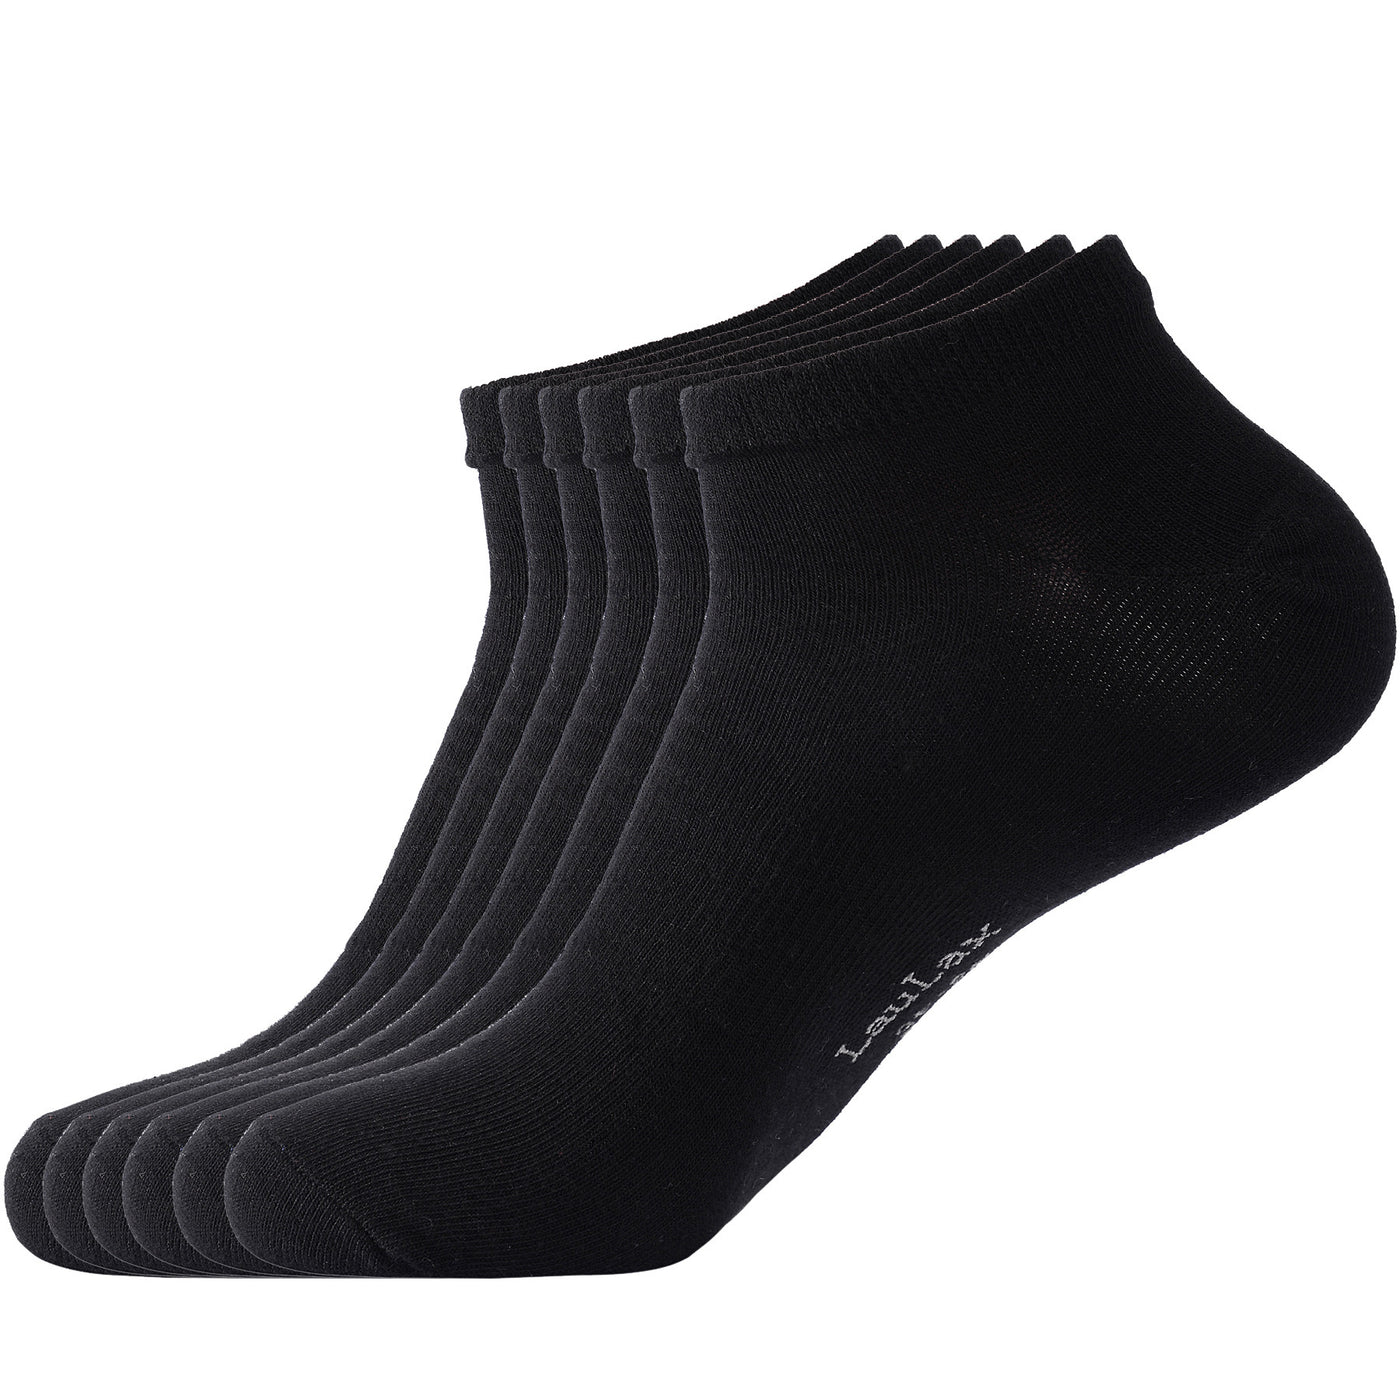 Laulax 6 Pairs Finest Combed Cotton Arch Support Trainer Socks, Black, Size UK 9 - 11 / Europ 43 - 46